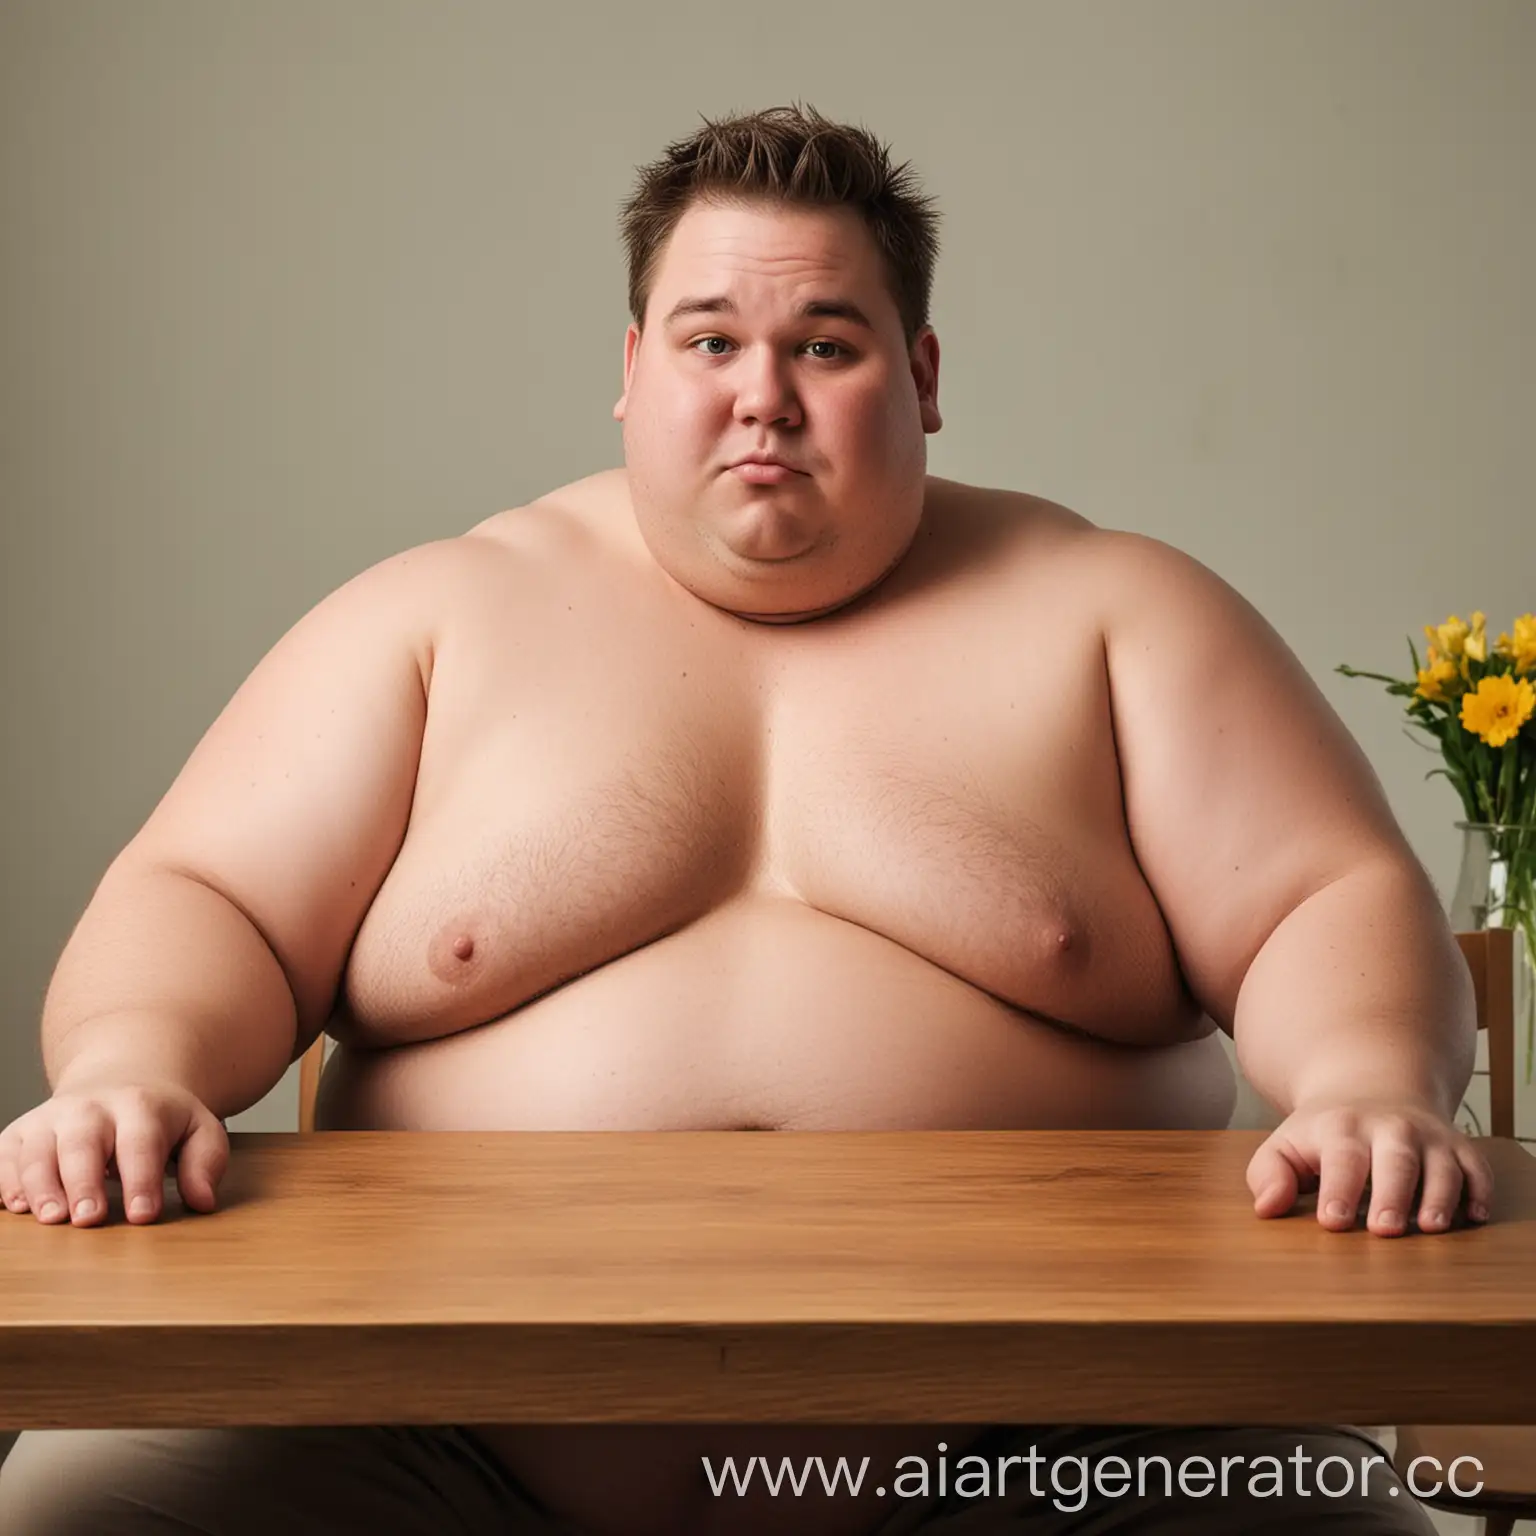 Chubby-Man-Relaxing-at-Dining-Table